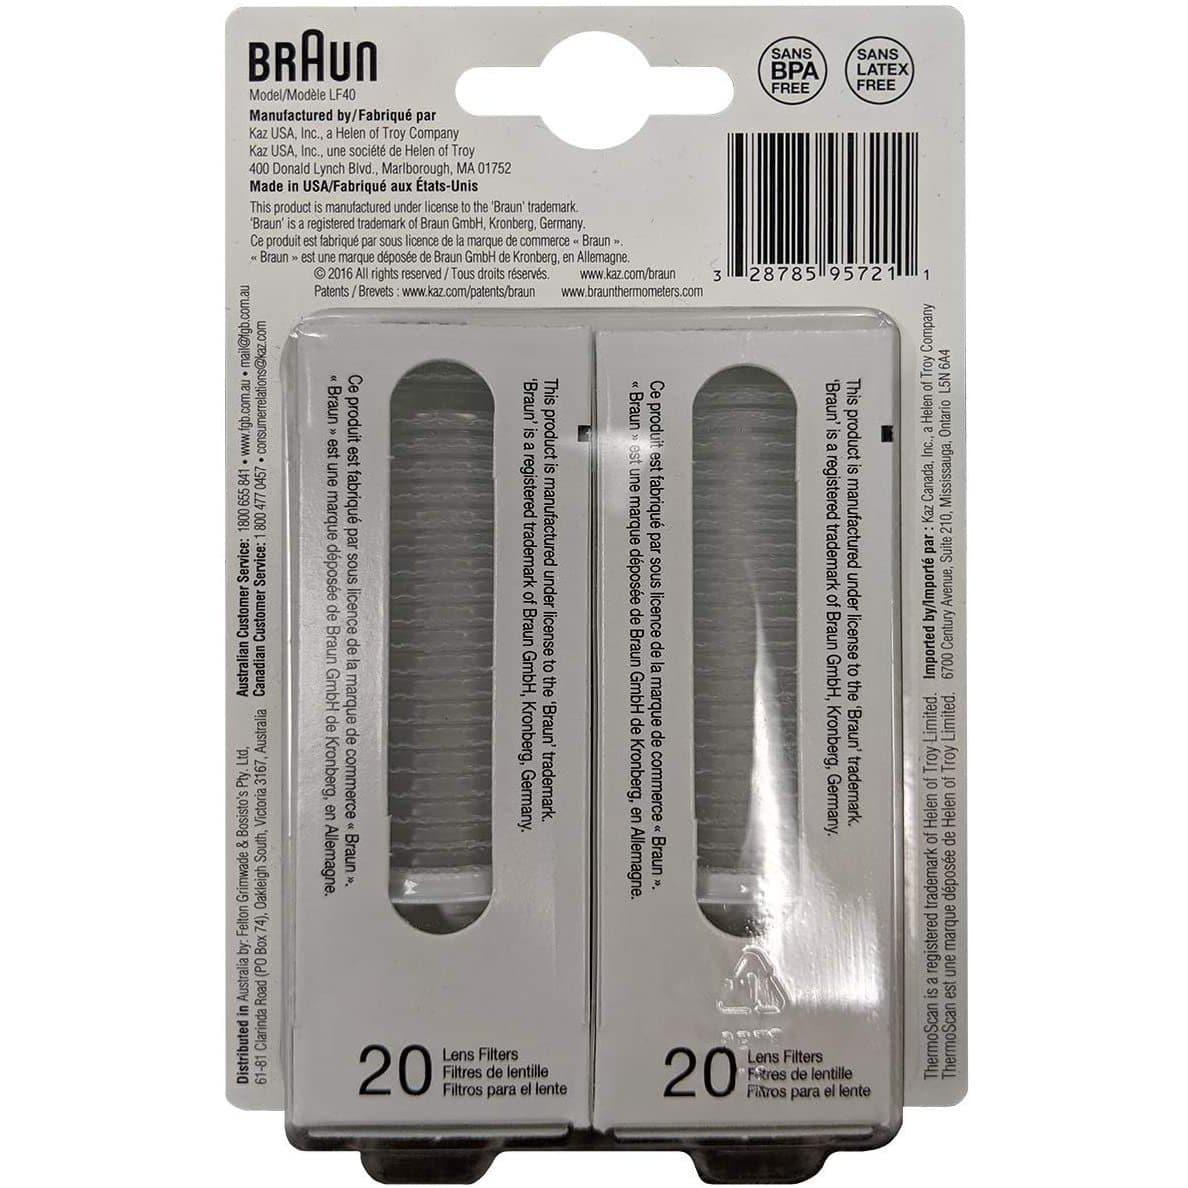 Braun LF40 ThermoScan Lens Filter Refills for Ear Thermometers - Pack of 40 | 12-C (7492931584188)